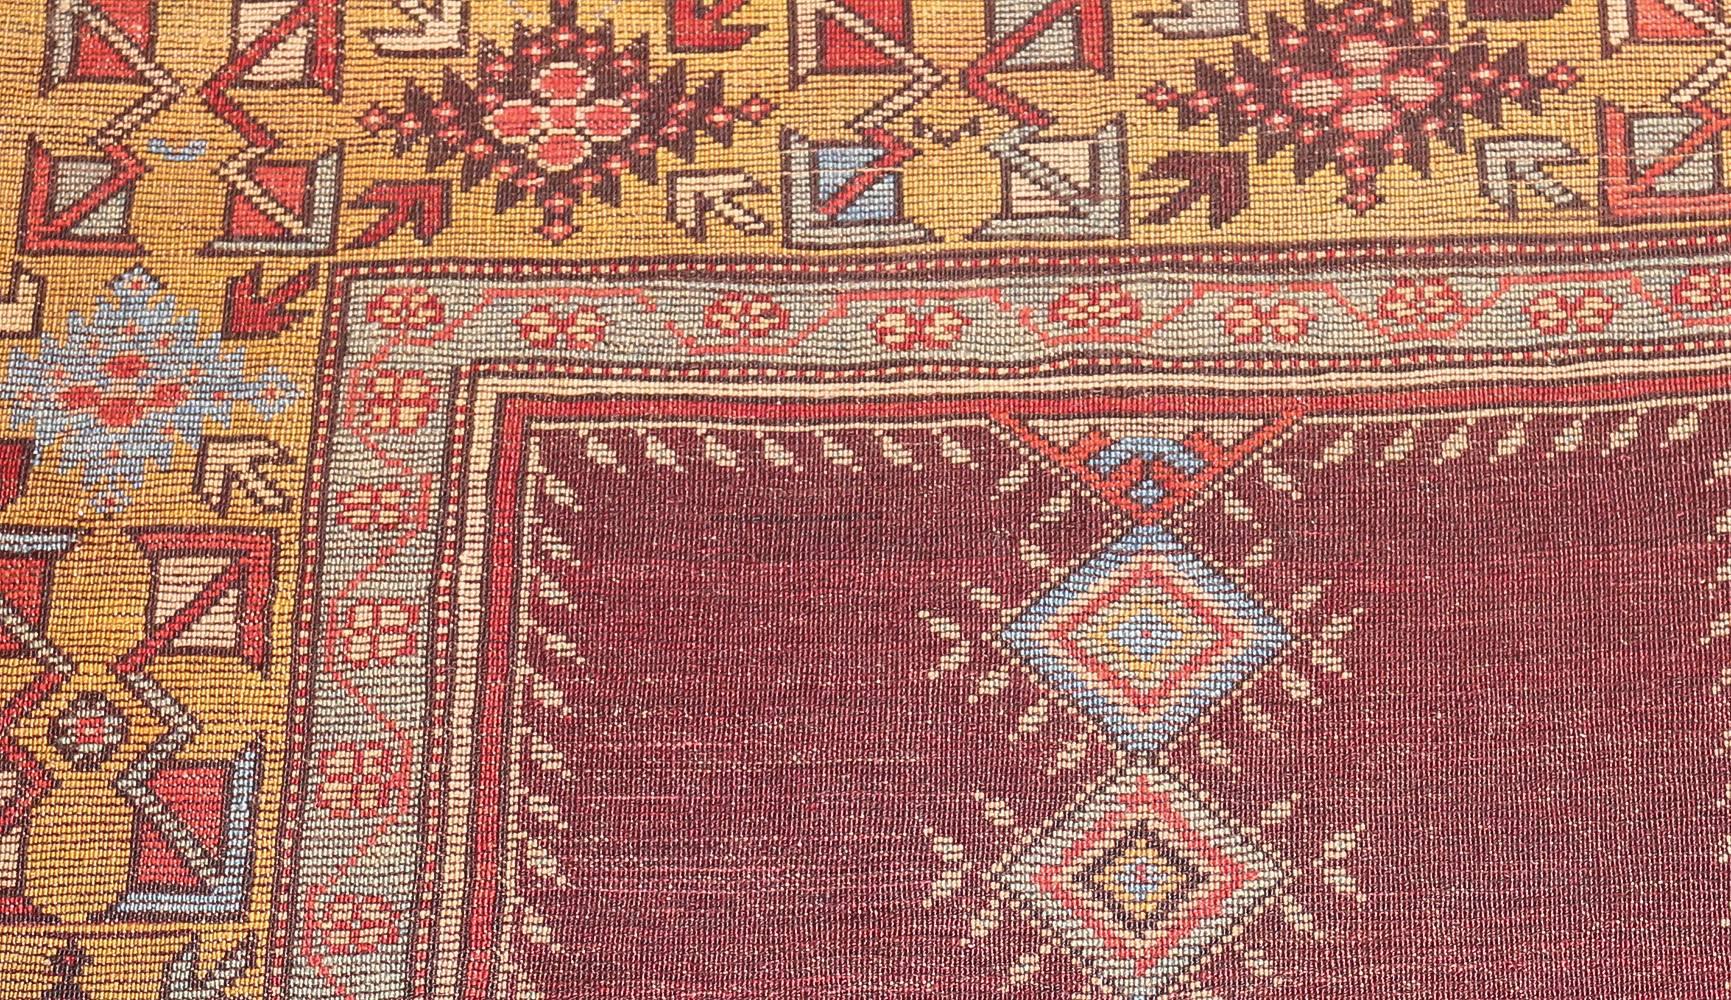 The fine wool-on-wool Turkish rugs woven in Bergama used only the finest quality fleece. Kazak-influenced Bergama carpets are often identified by their distinctive red wefts. Their varied styles include compartmental medallions, directional prayer